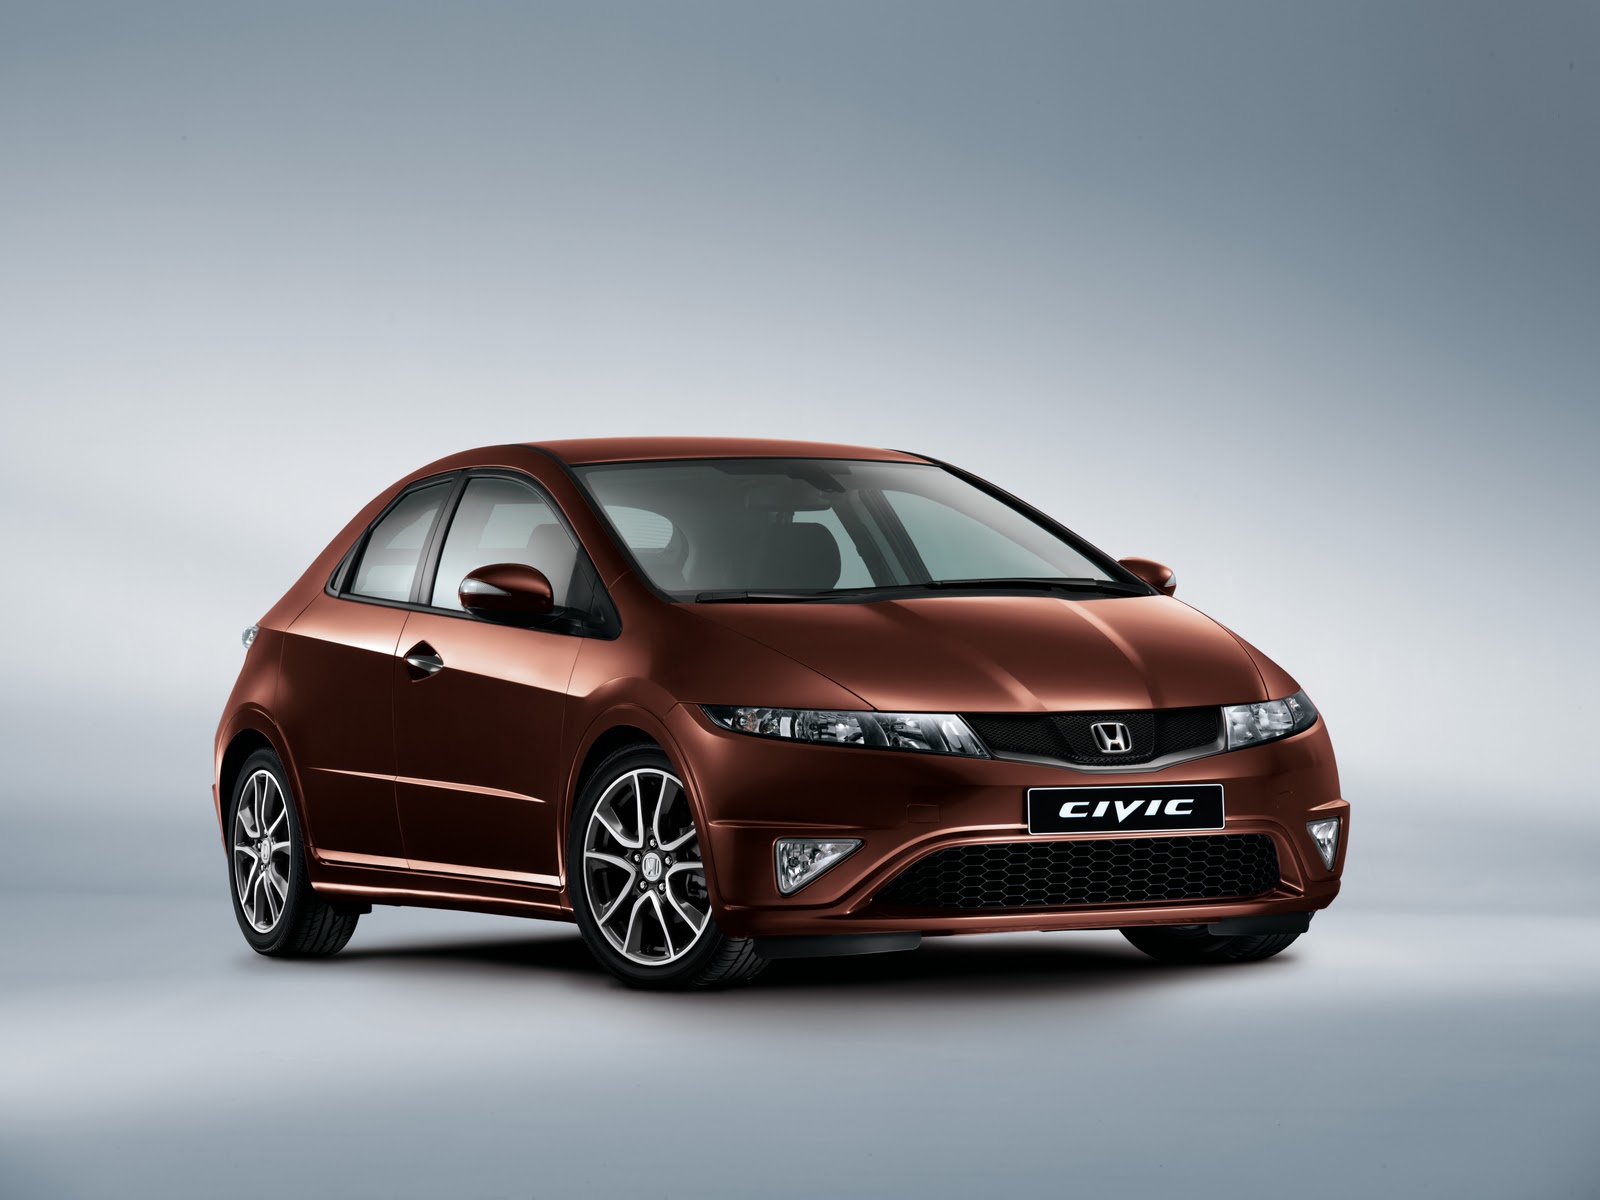 Prices for the 2011 Civic